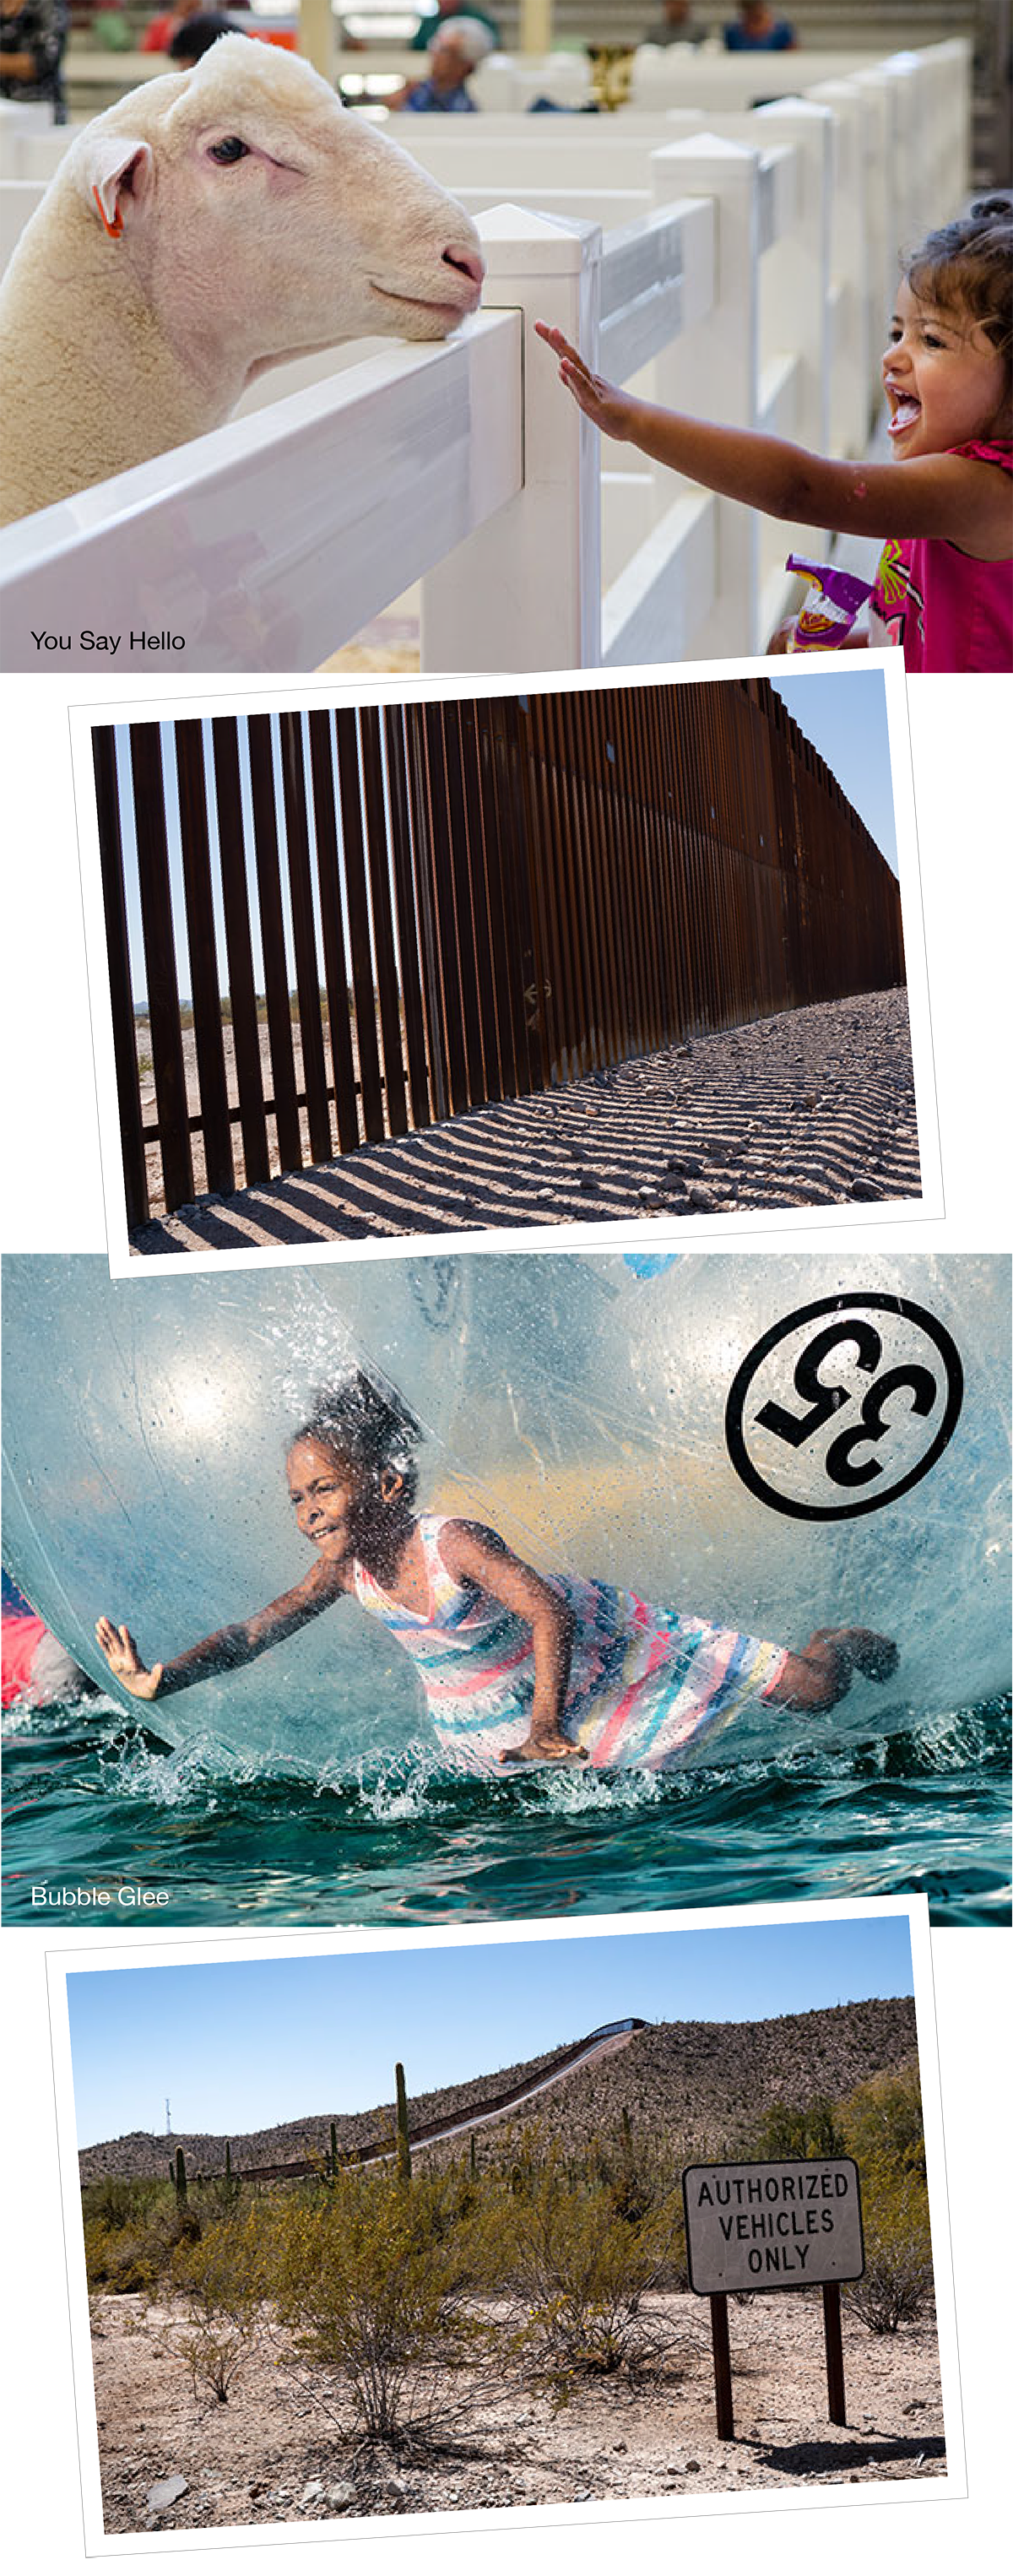 Show Images and Border wall images